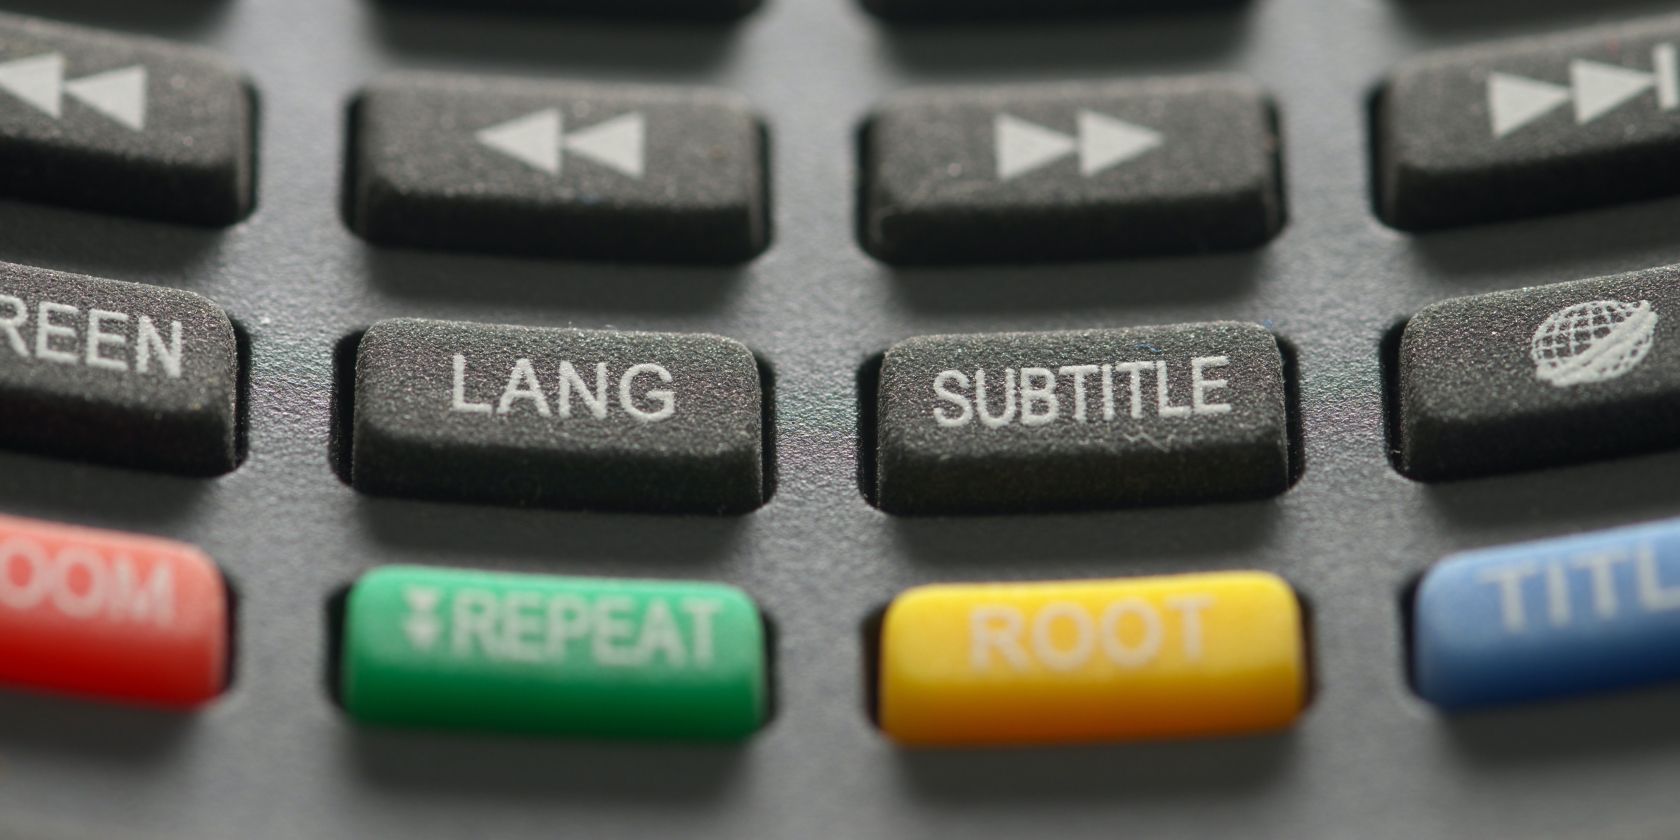 language and subtitle buttons on a remote